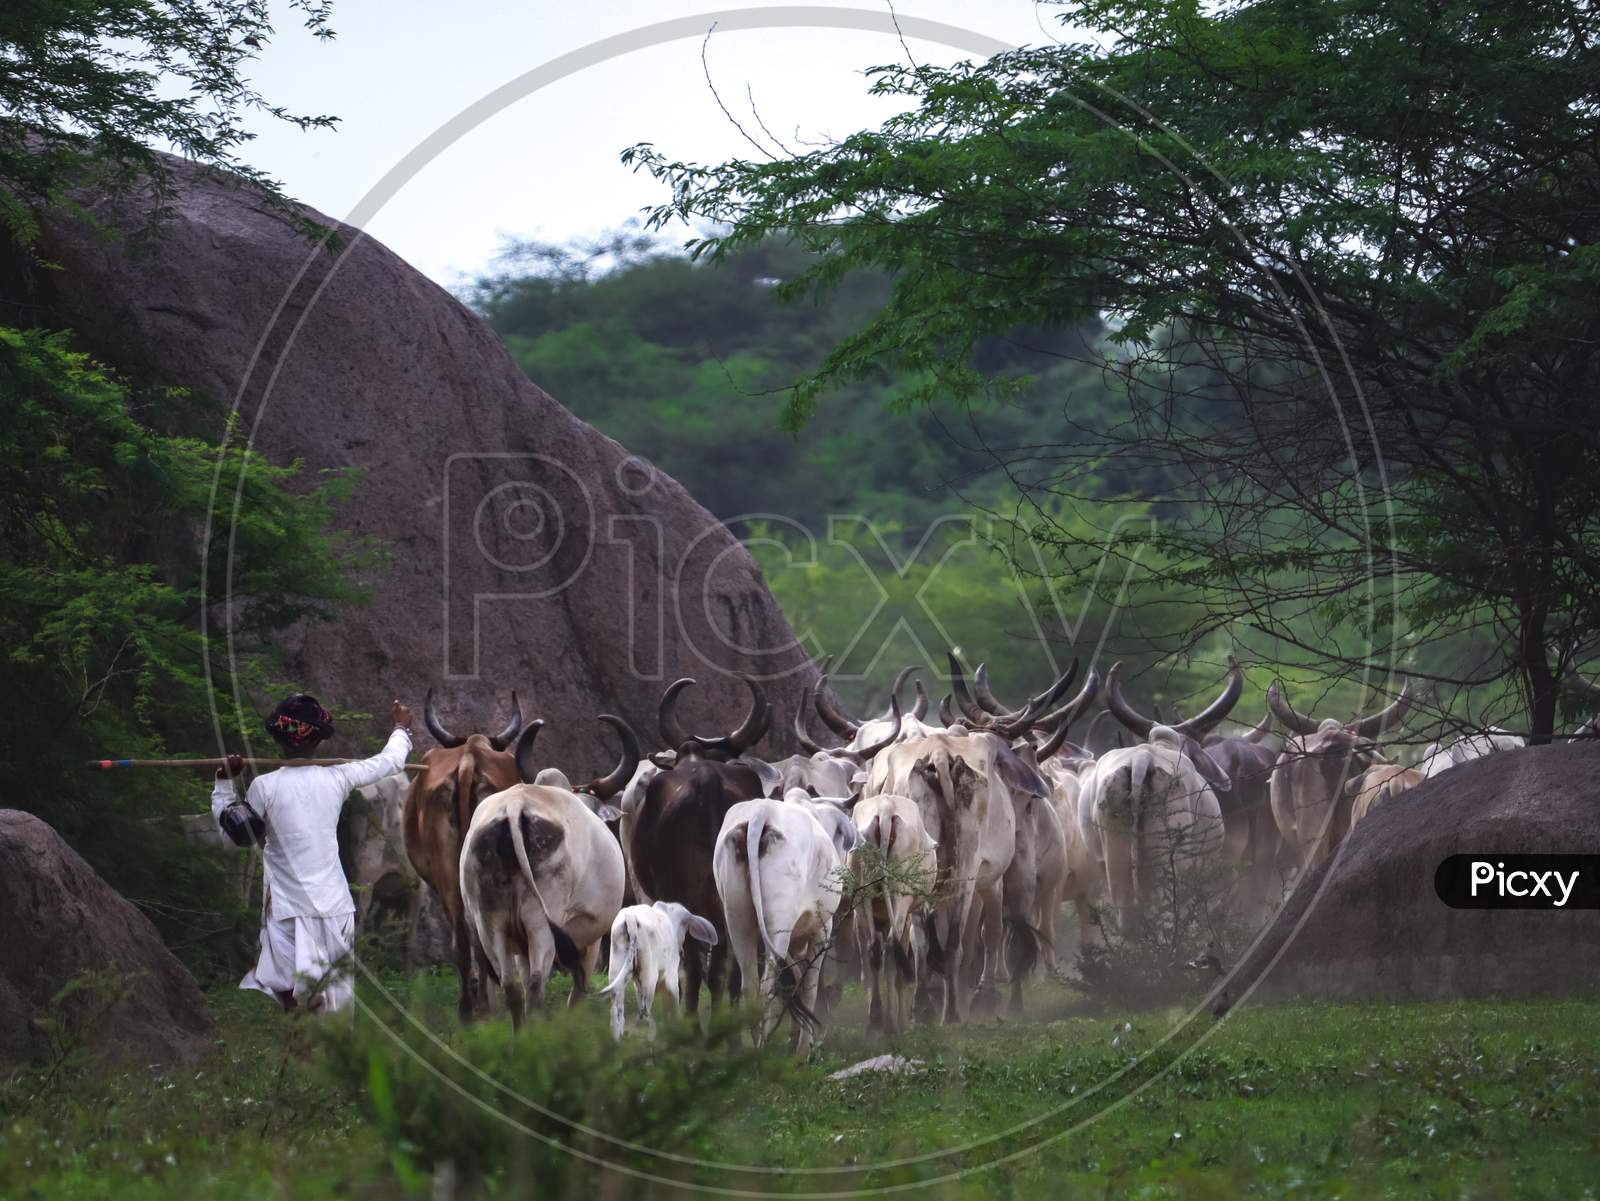 The Indian Shepherd On The Way With Its Herd Of Cows, And Foggy Weather. With Selective Focus On Subject.